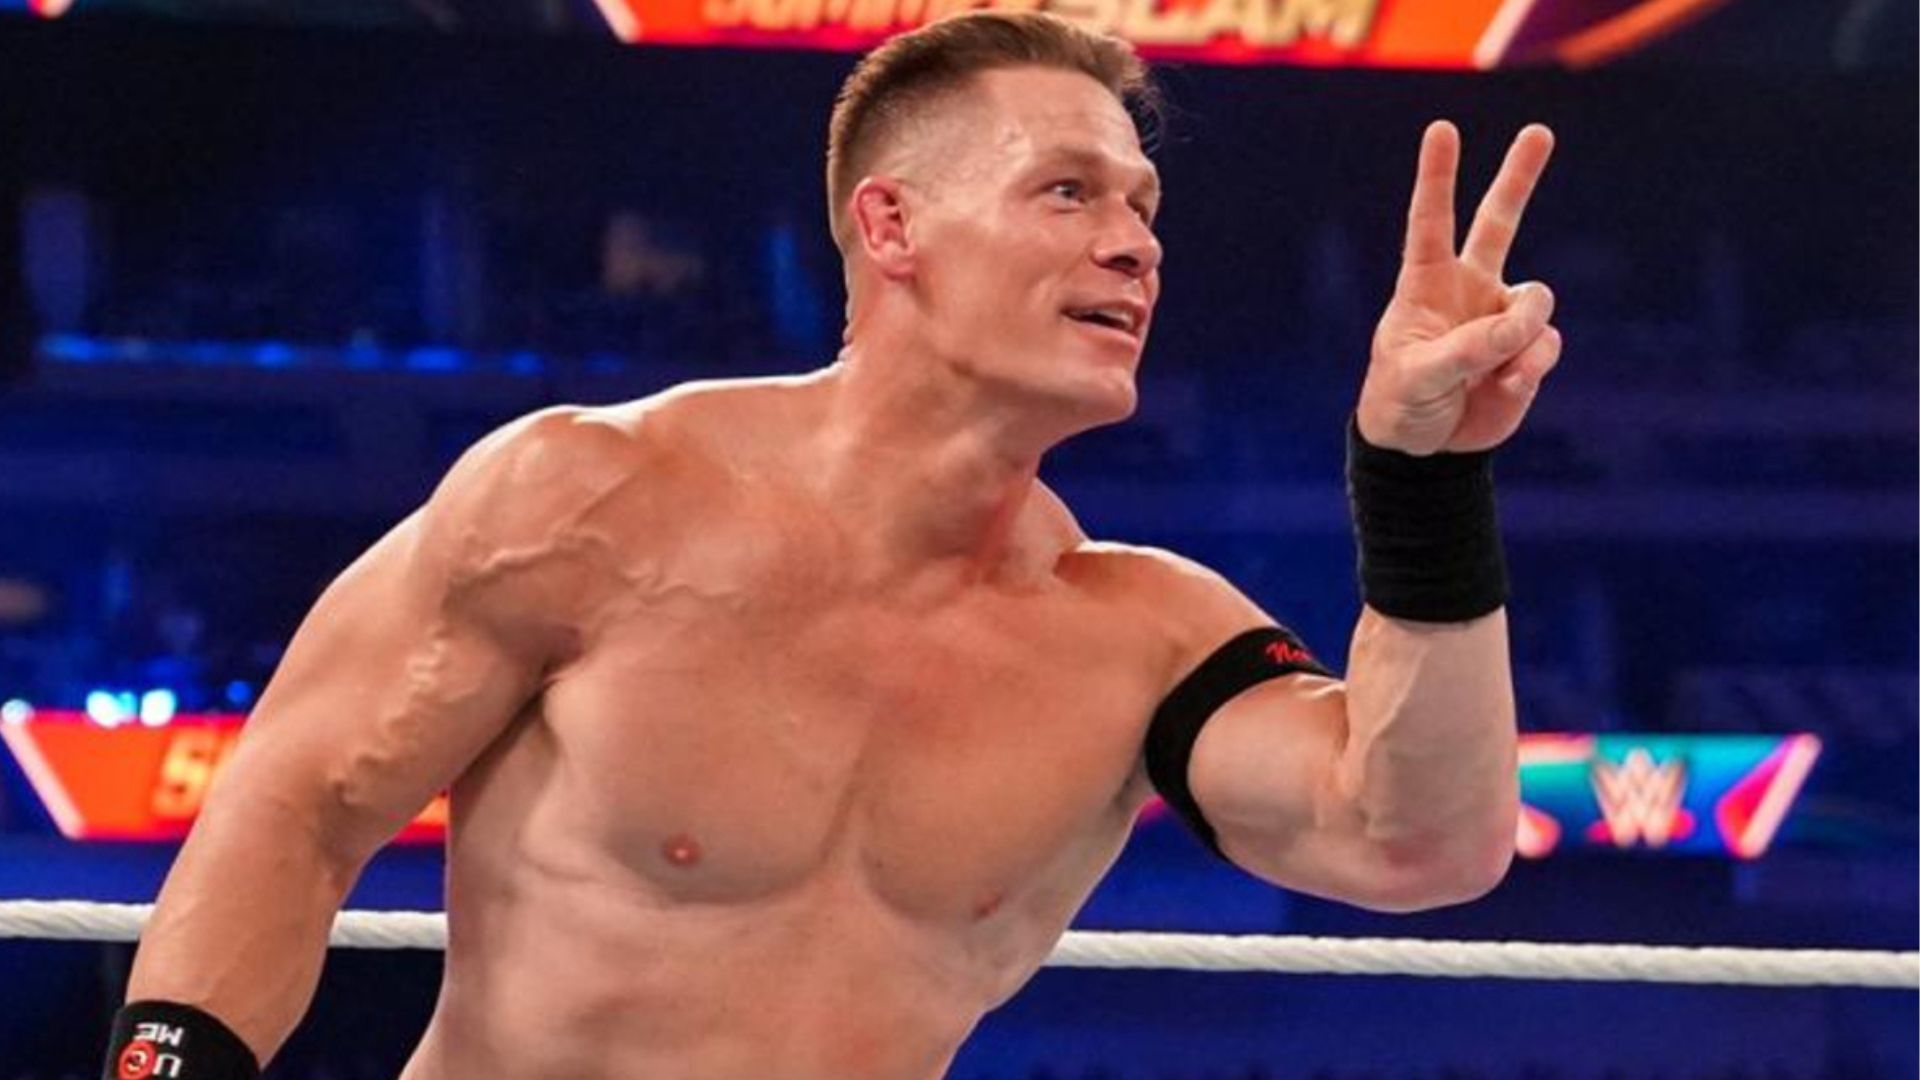 John Cena has been put on notice by Becky Lynch!